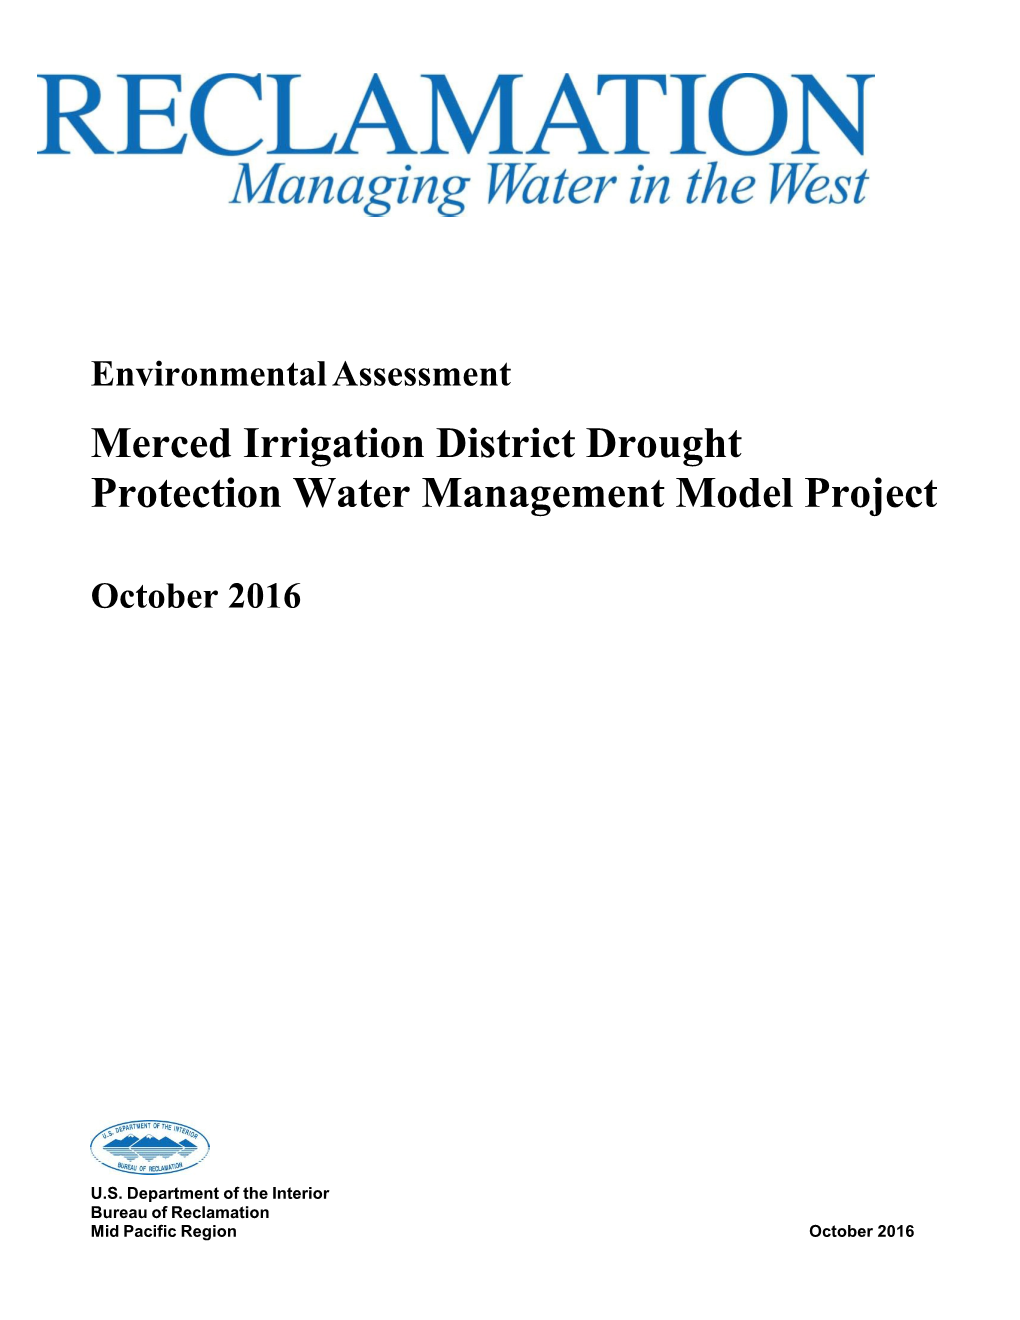 Merced Irrigation District Drought Protection Water Management Model Project